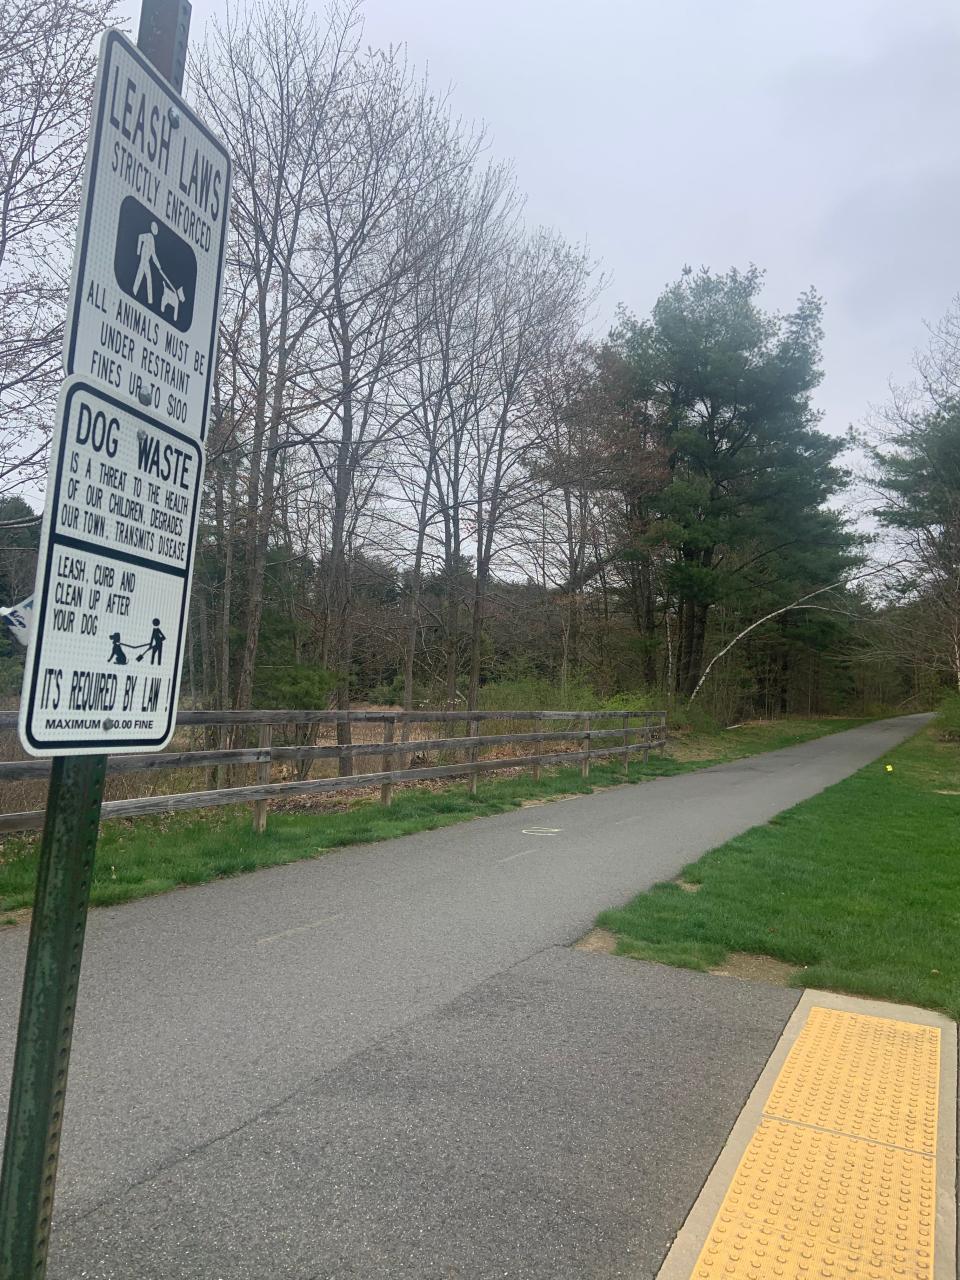 The North Central Pathway that begins near the Clark Memorial Community Center and travels along Whitney Pond in Winchendon is a popular spot for walking dogs.